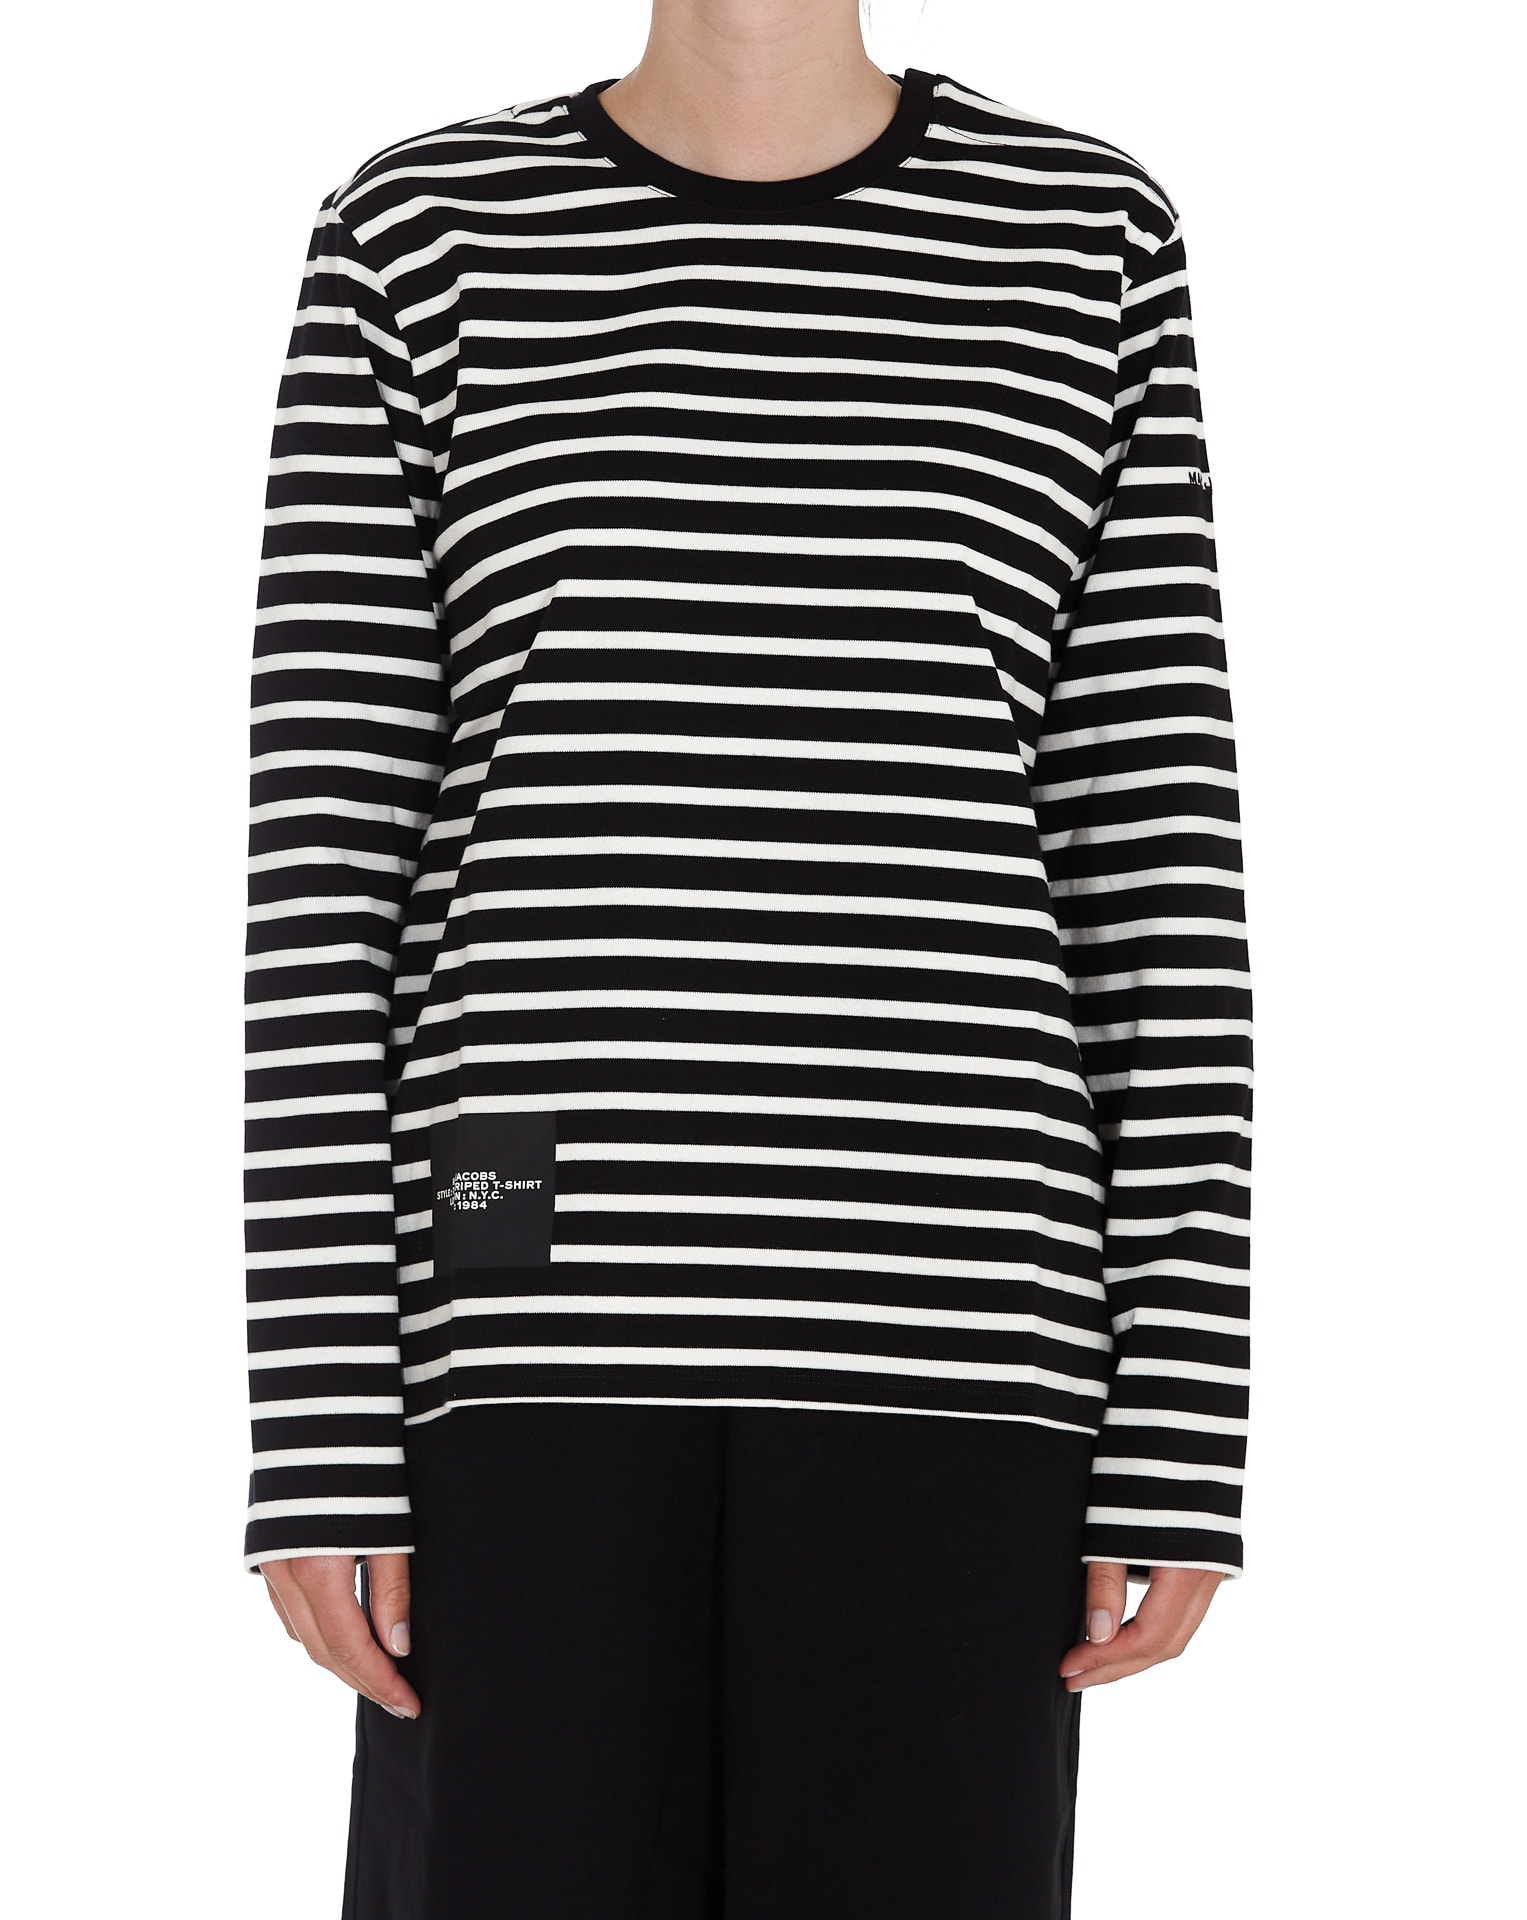 Marc Jacobs The Striped T-shirt